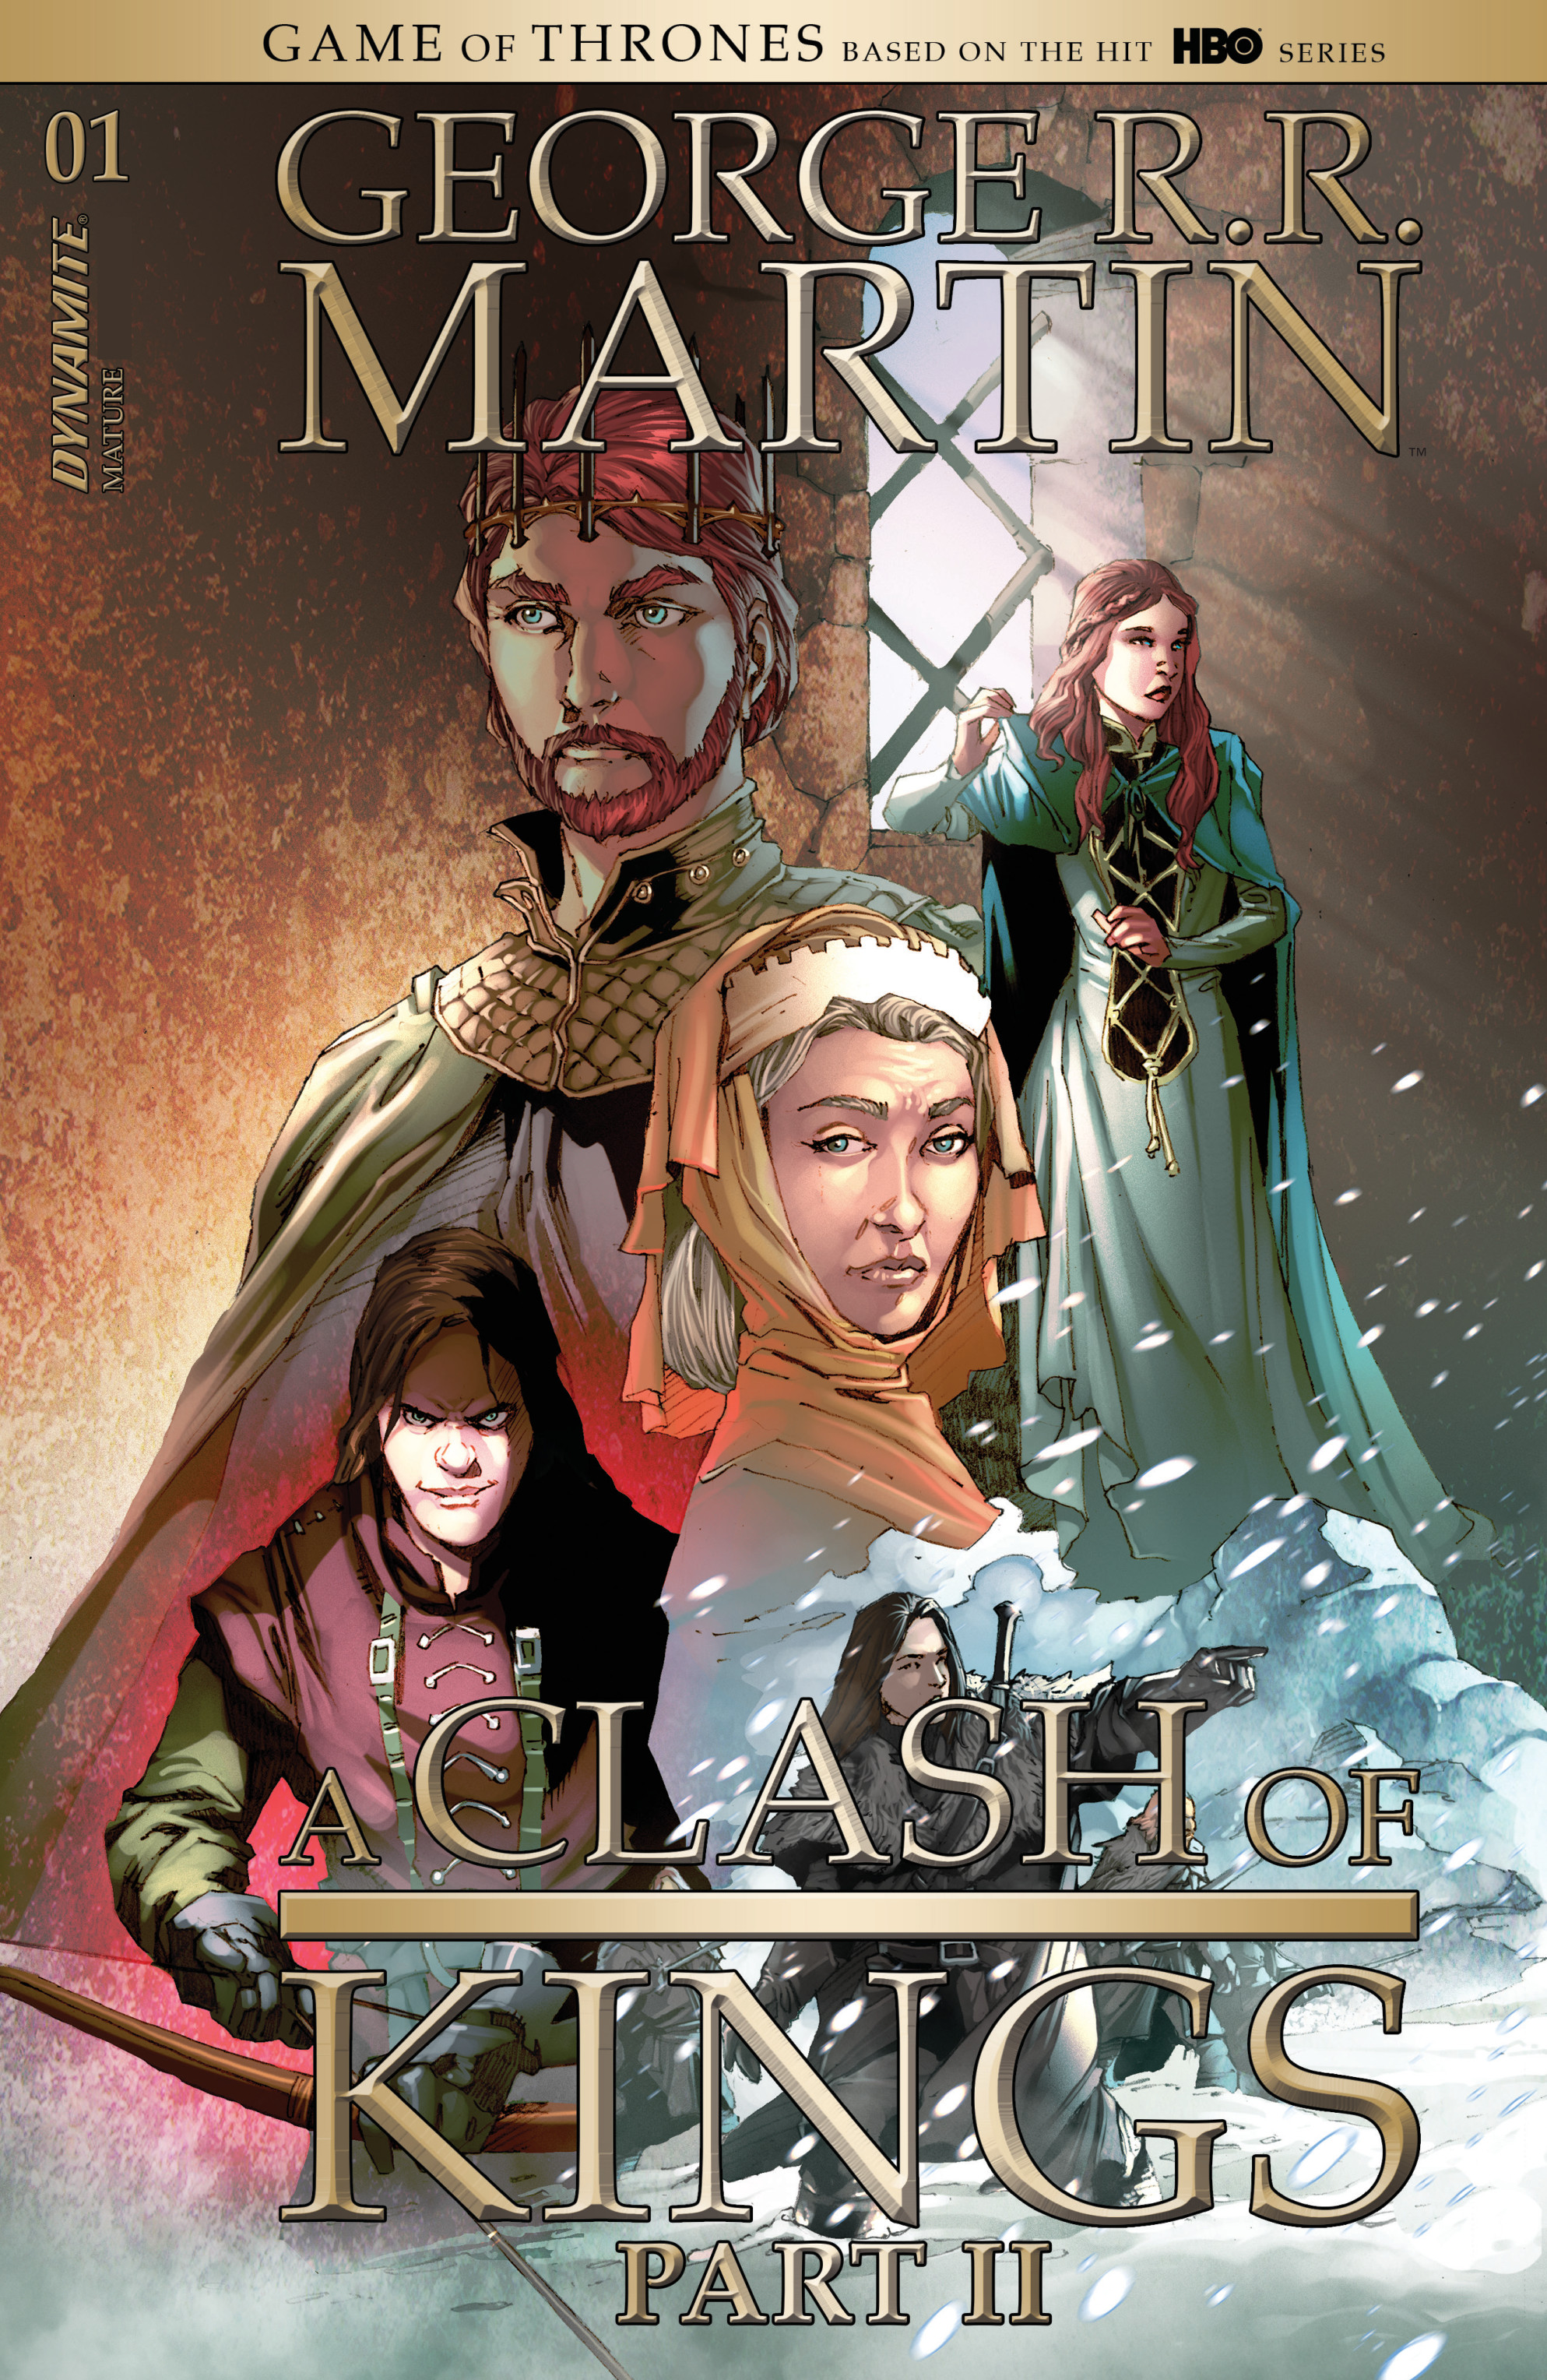 a clash of kings graphic novel volume 4